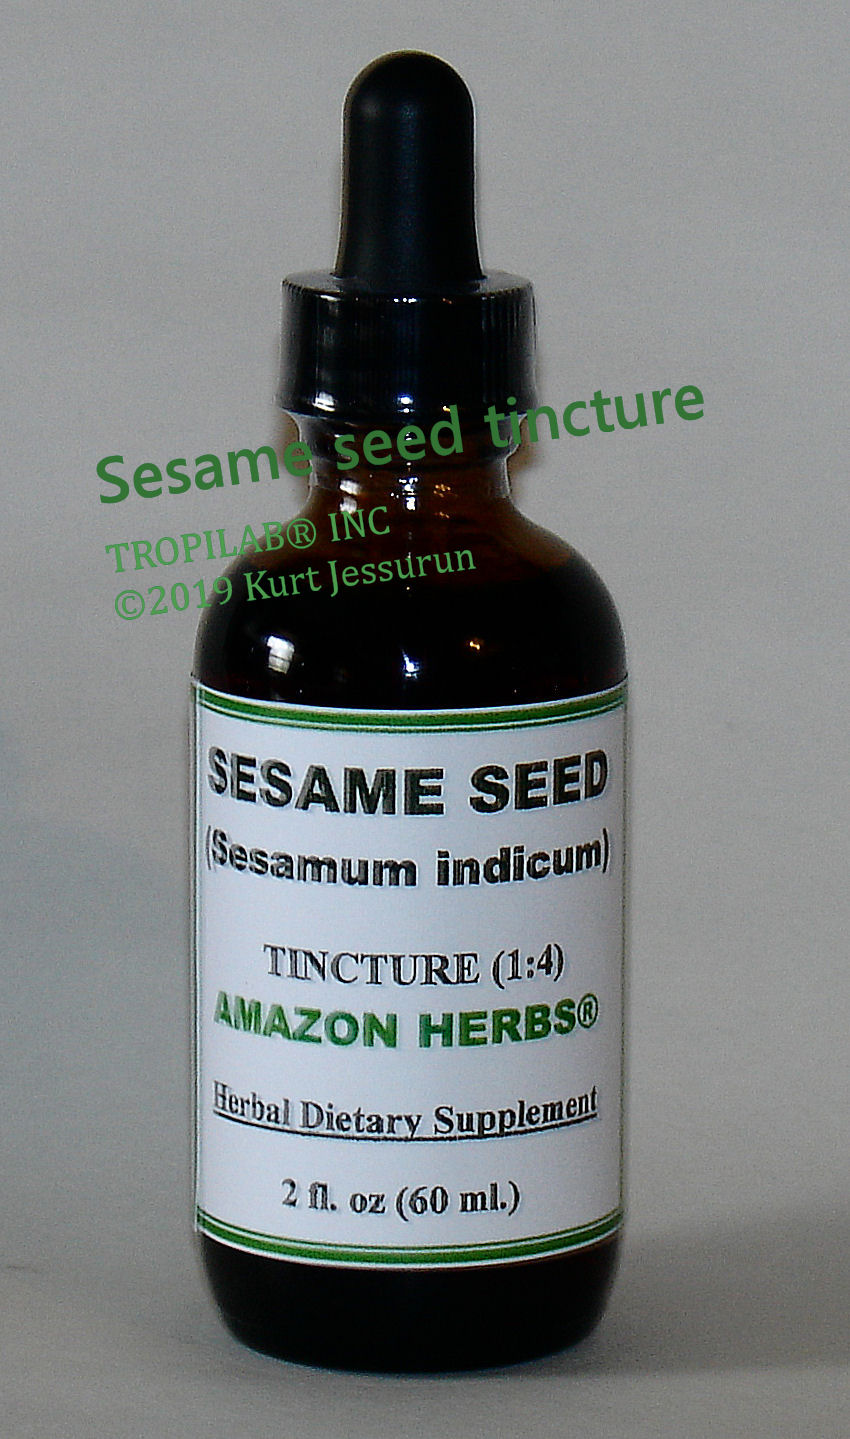 Tincture from Sesamum indicum; Sesame seed is abundantly found in Suriname